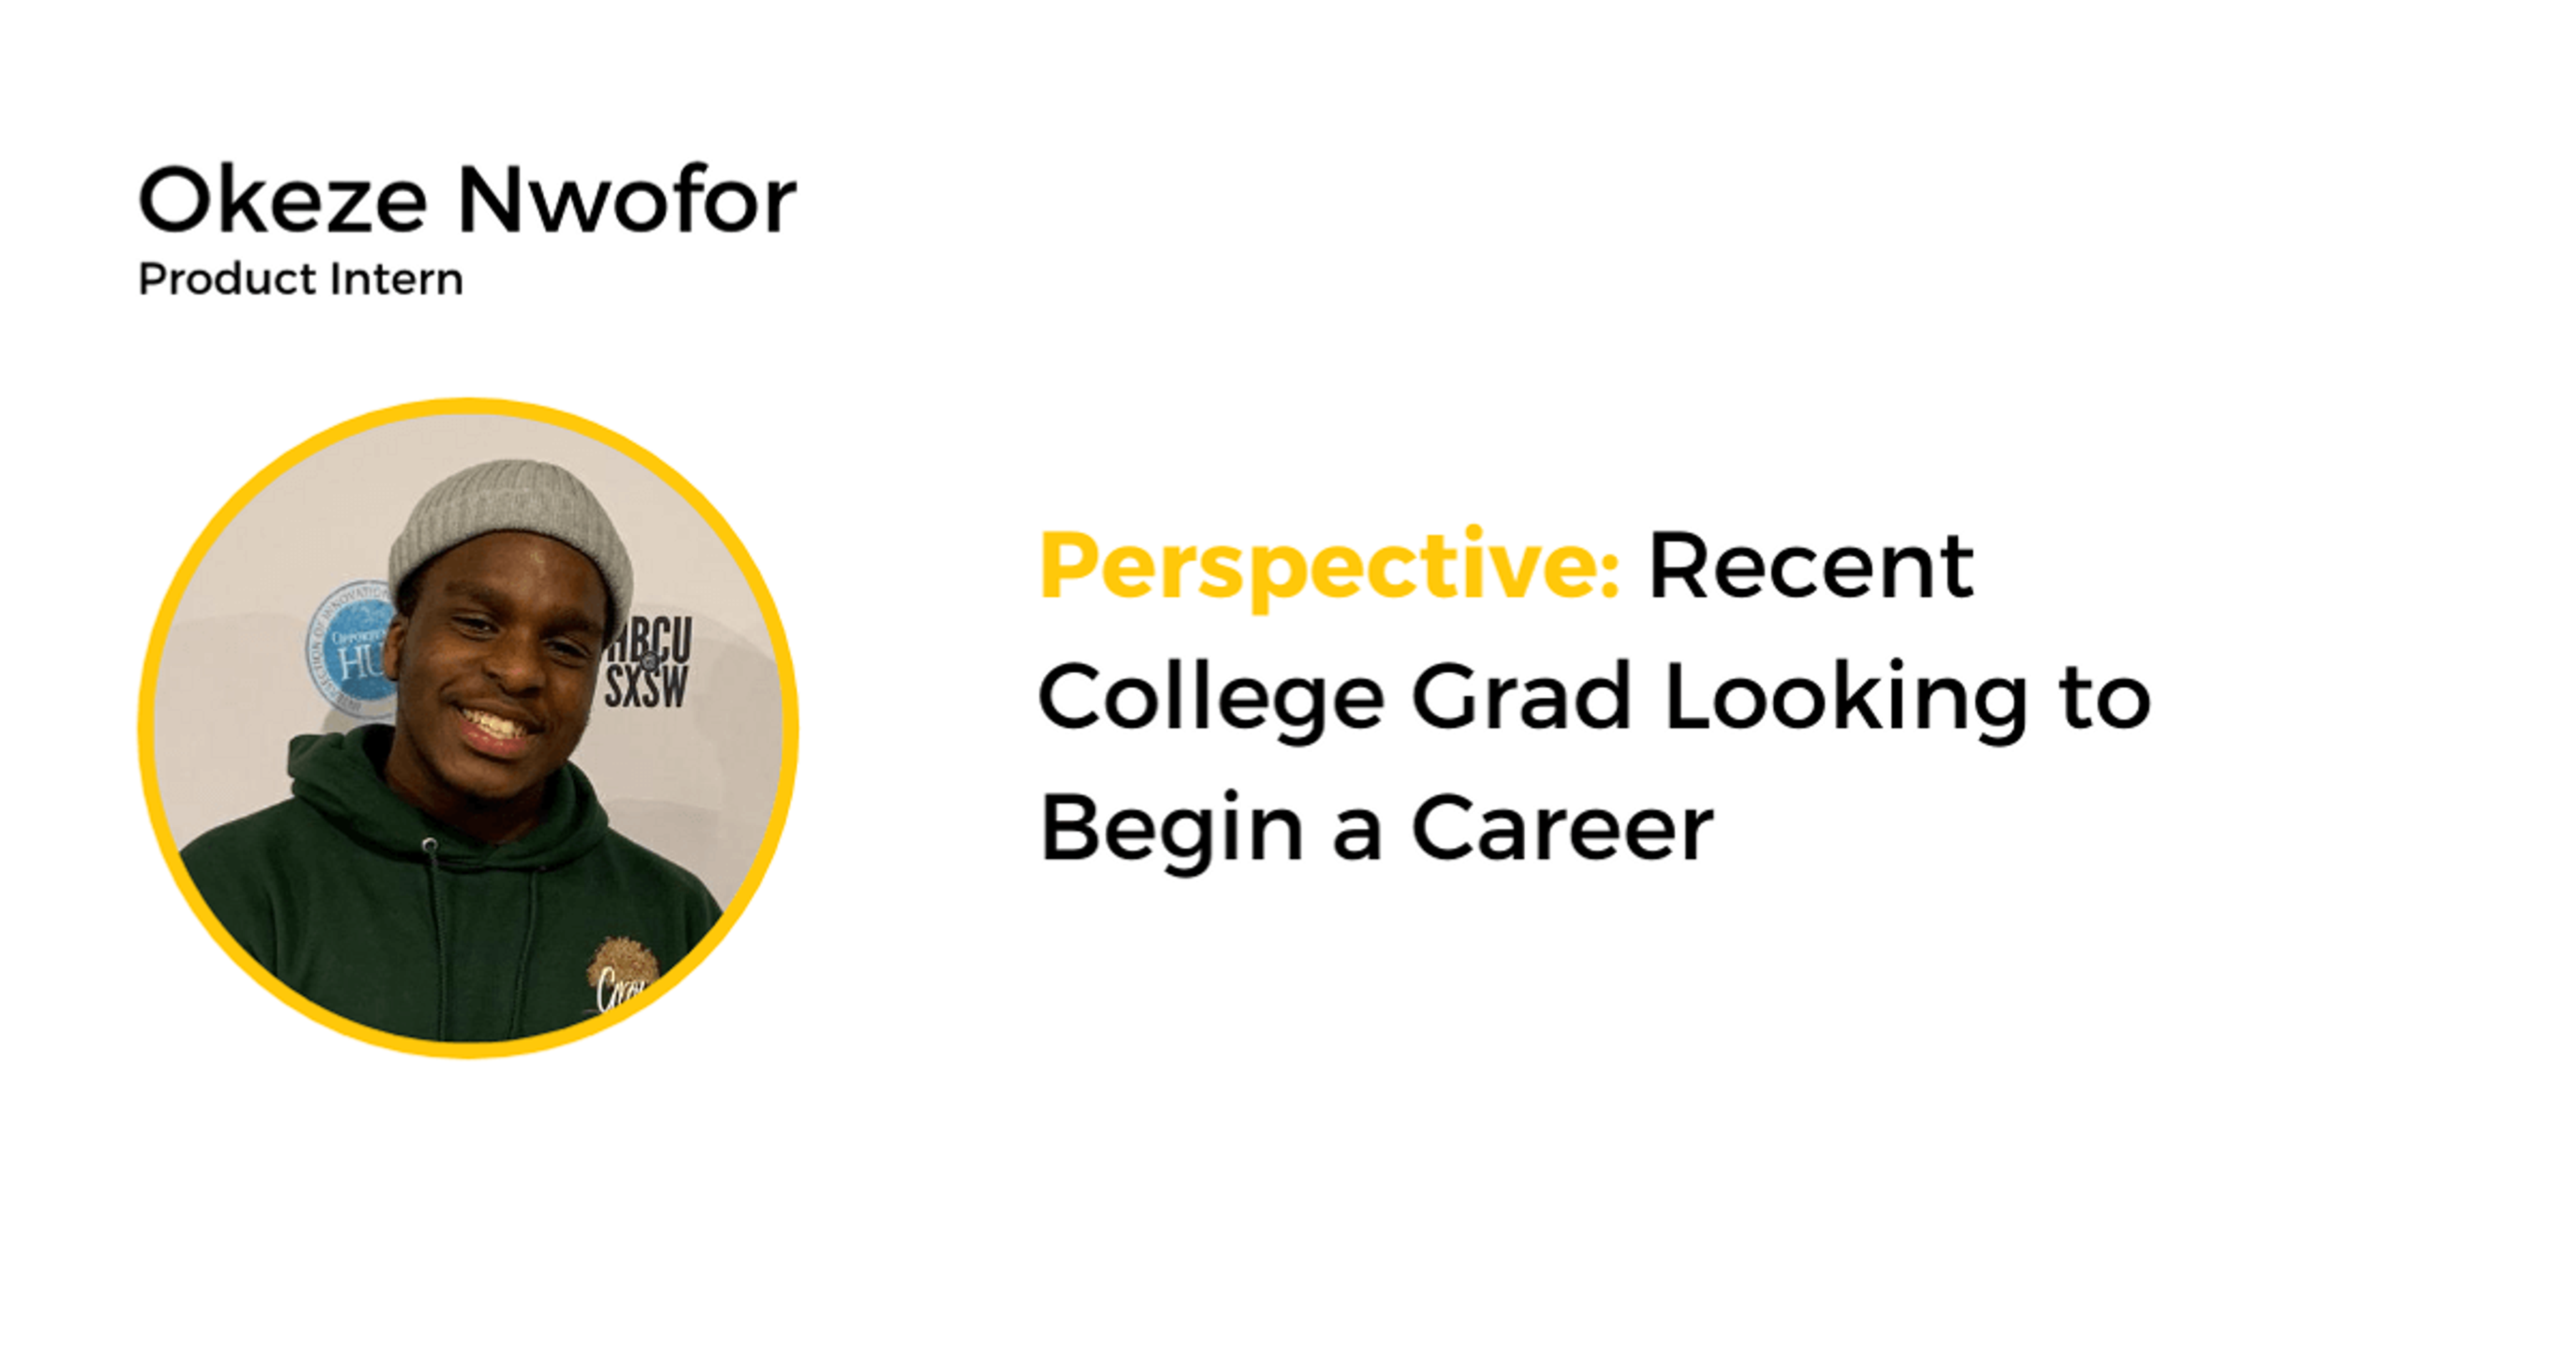 Okeze Nwofor, product intern, shares his perspective on looking to begin a career as a recent college grad.